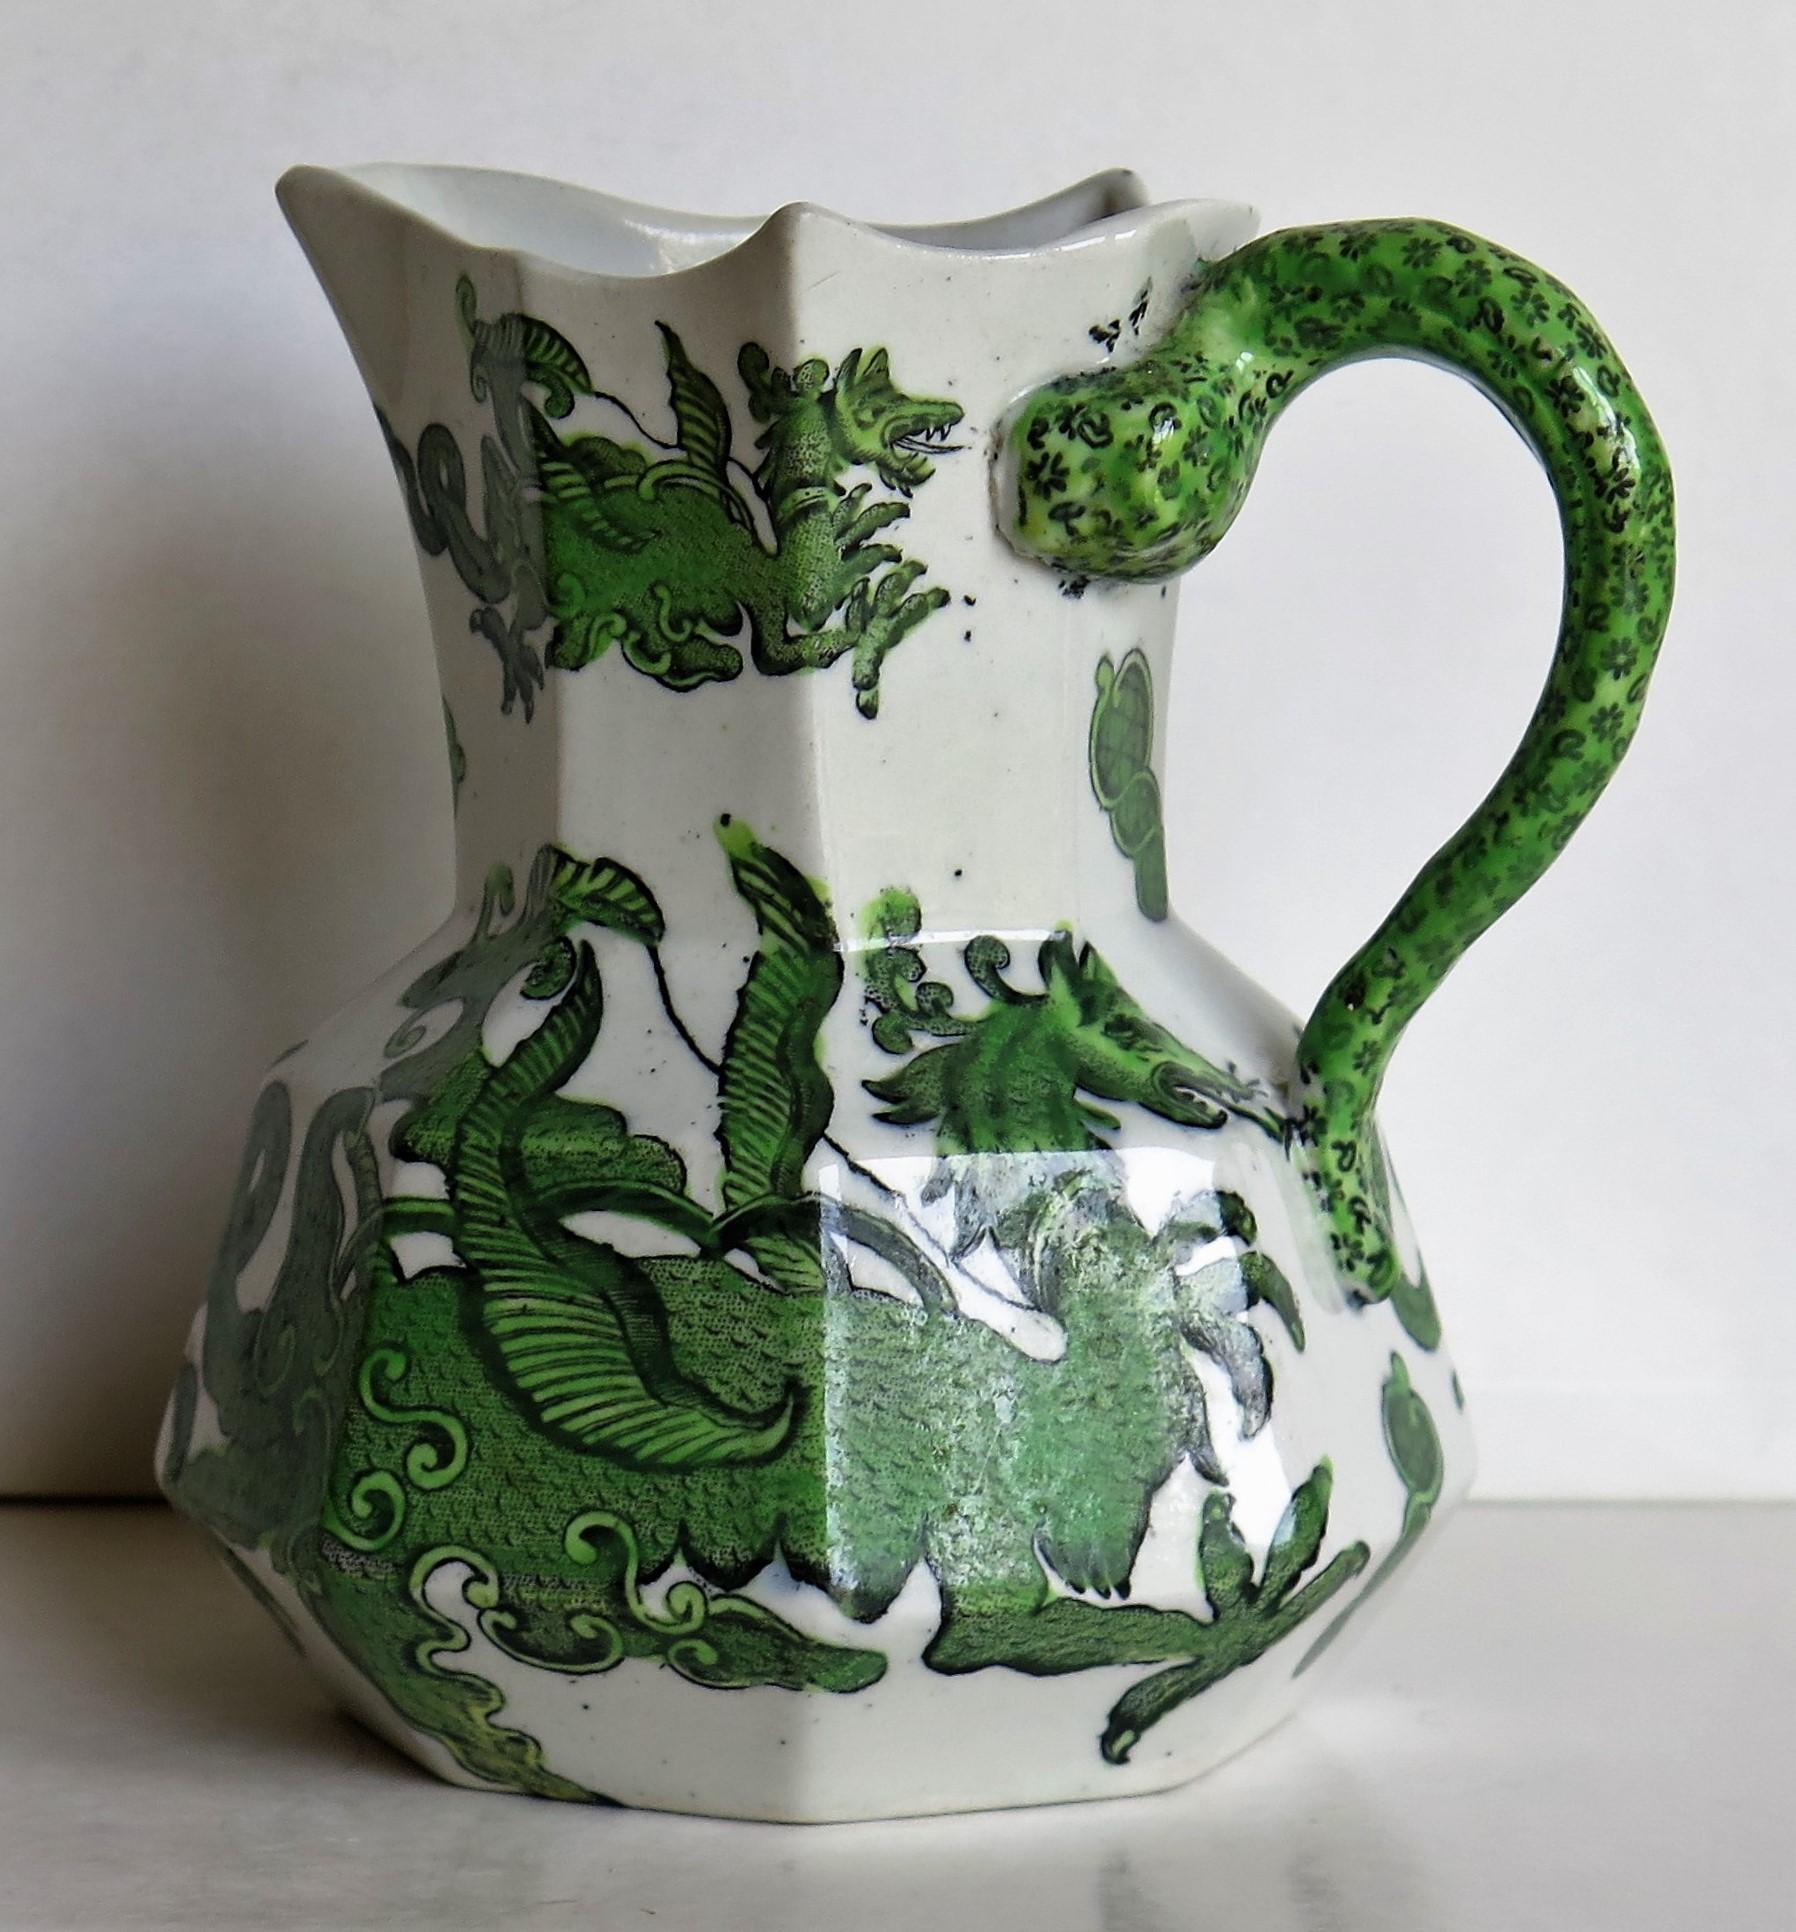 This is a very good Hydra jug or pitcher, made by Mason's Ironstone, England in the 19th century, circa 1870. 

The jug is octagonal in shape with the snake handle. These jugs were made in a range of sizes, varying from a small of under three